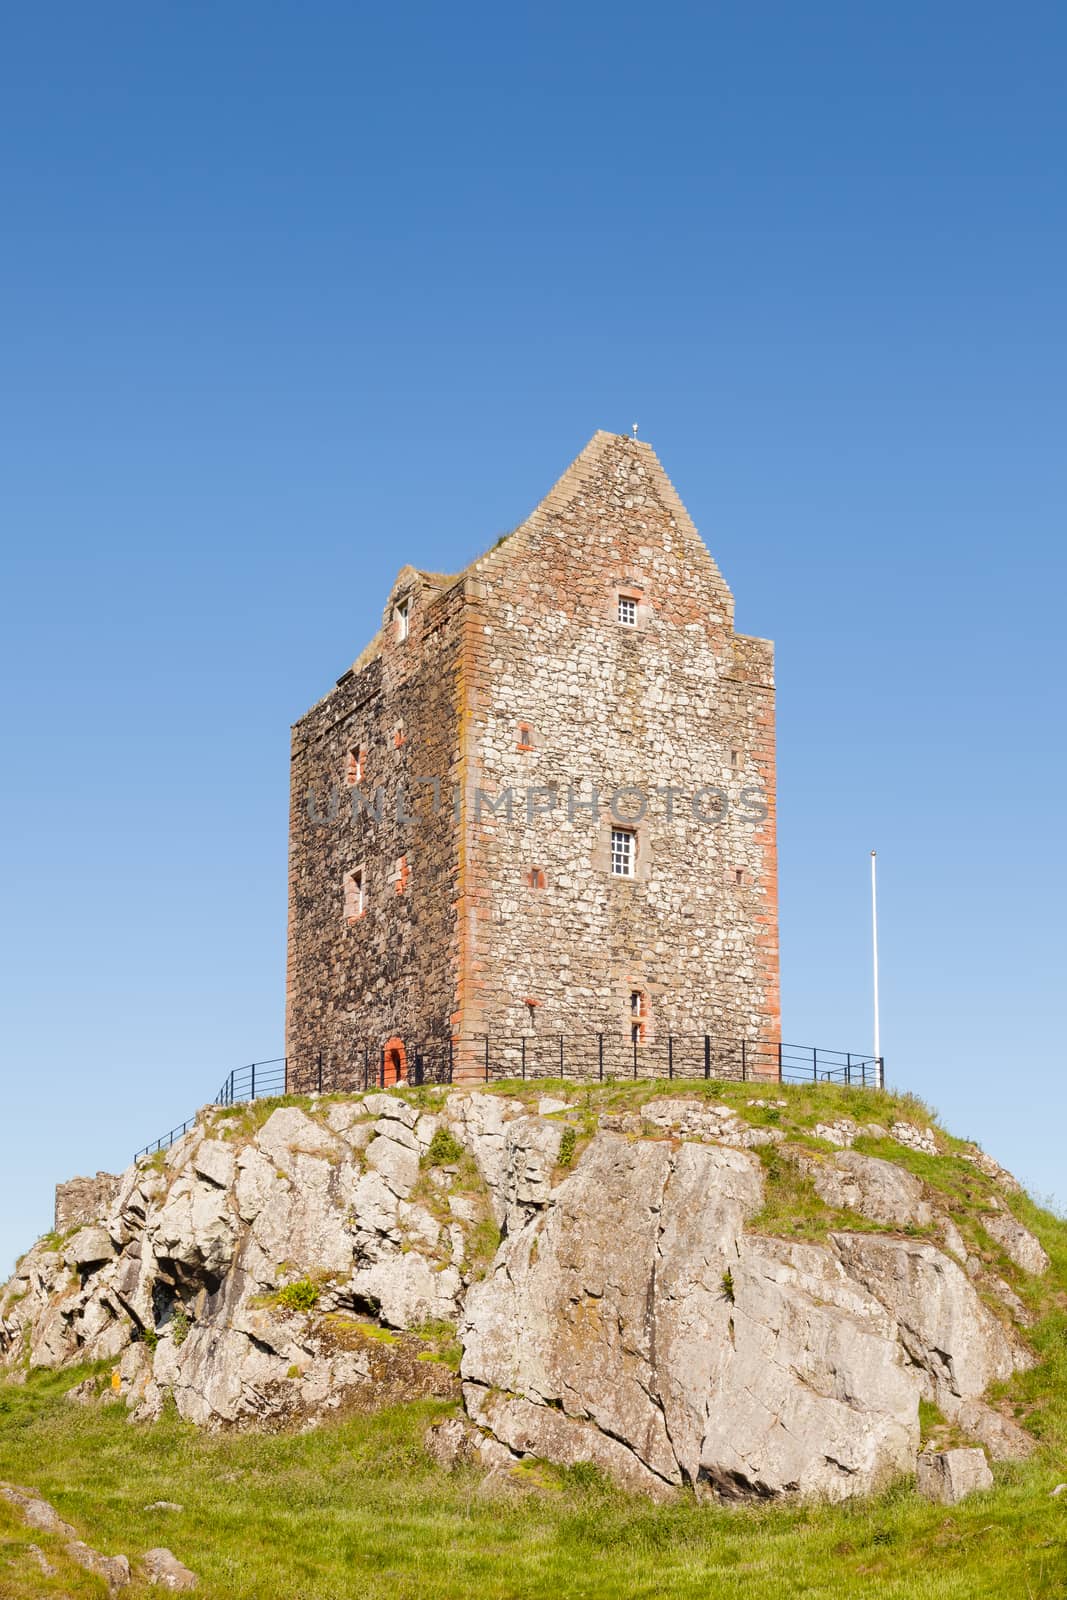 A close up picture of Smailholm tower in the Scottish Borders.  The tower was build in the 1400's as protection from border raiders and the elements.